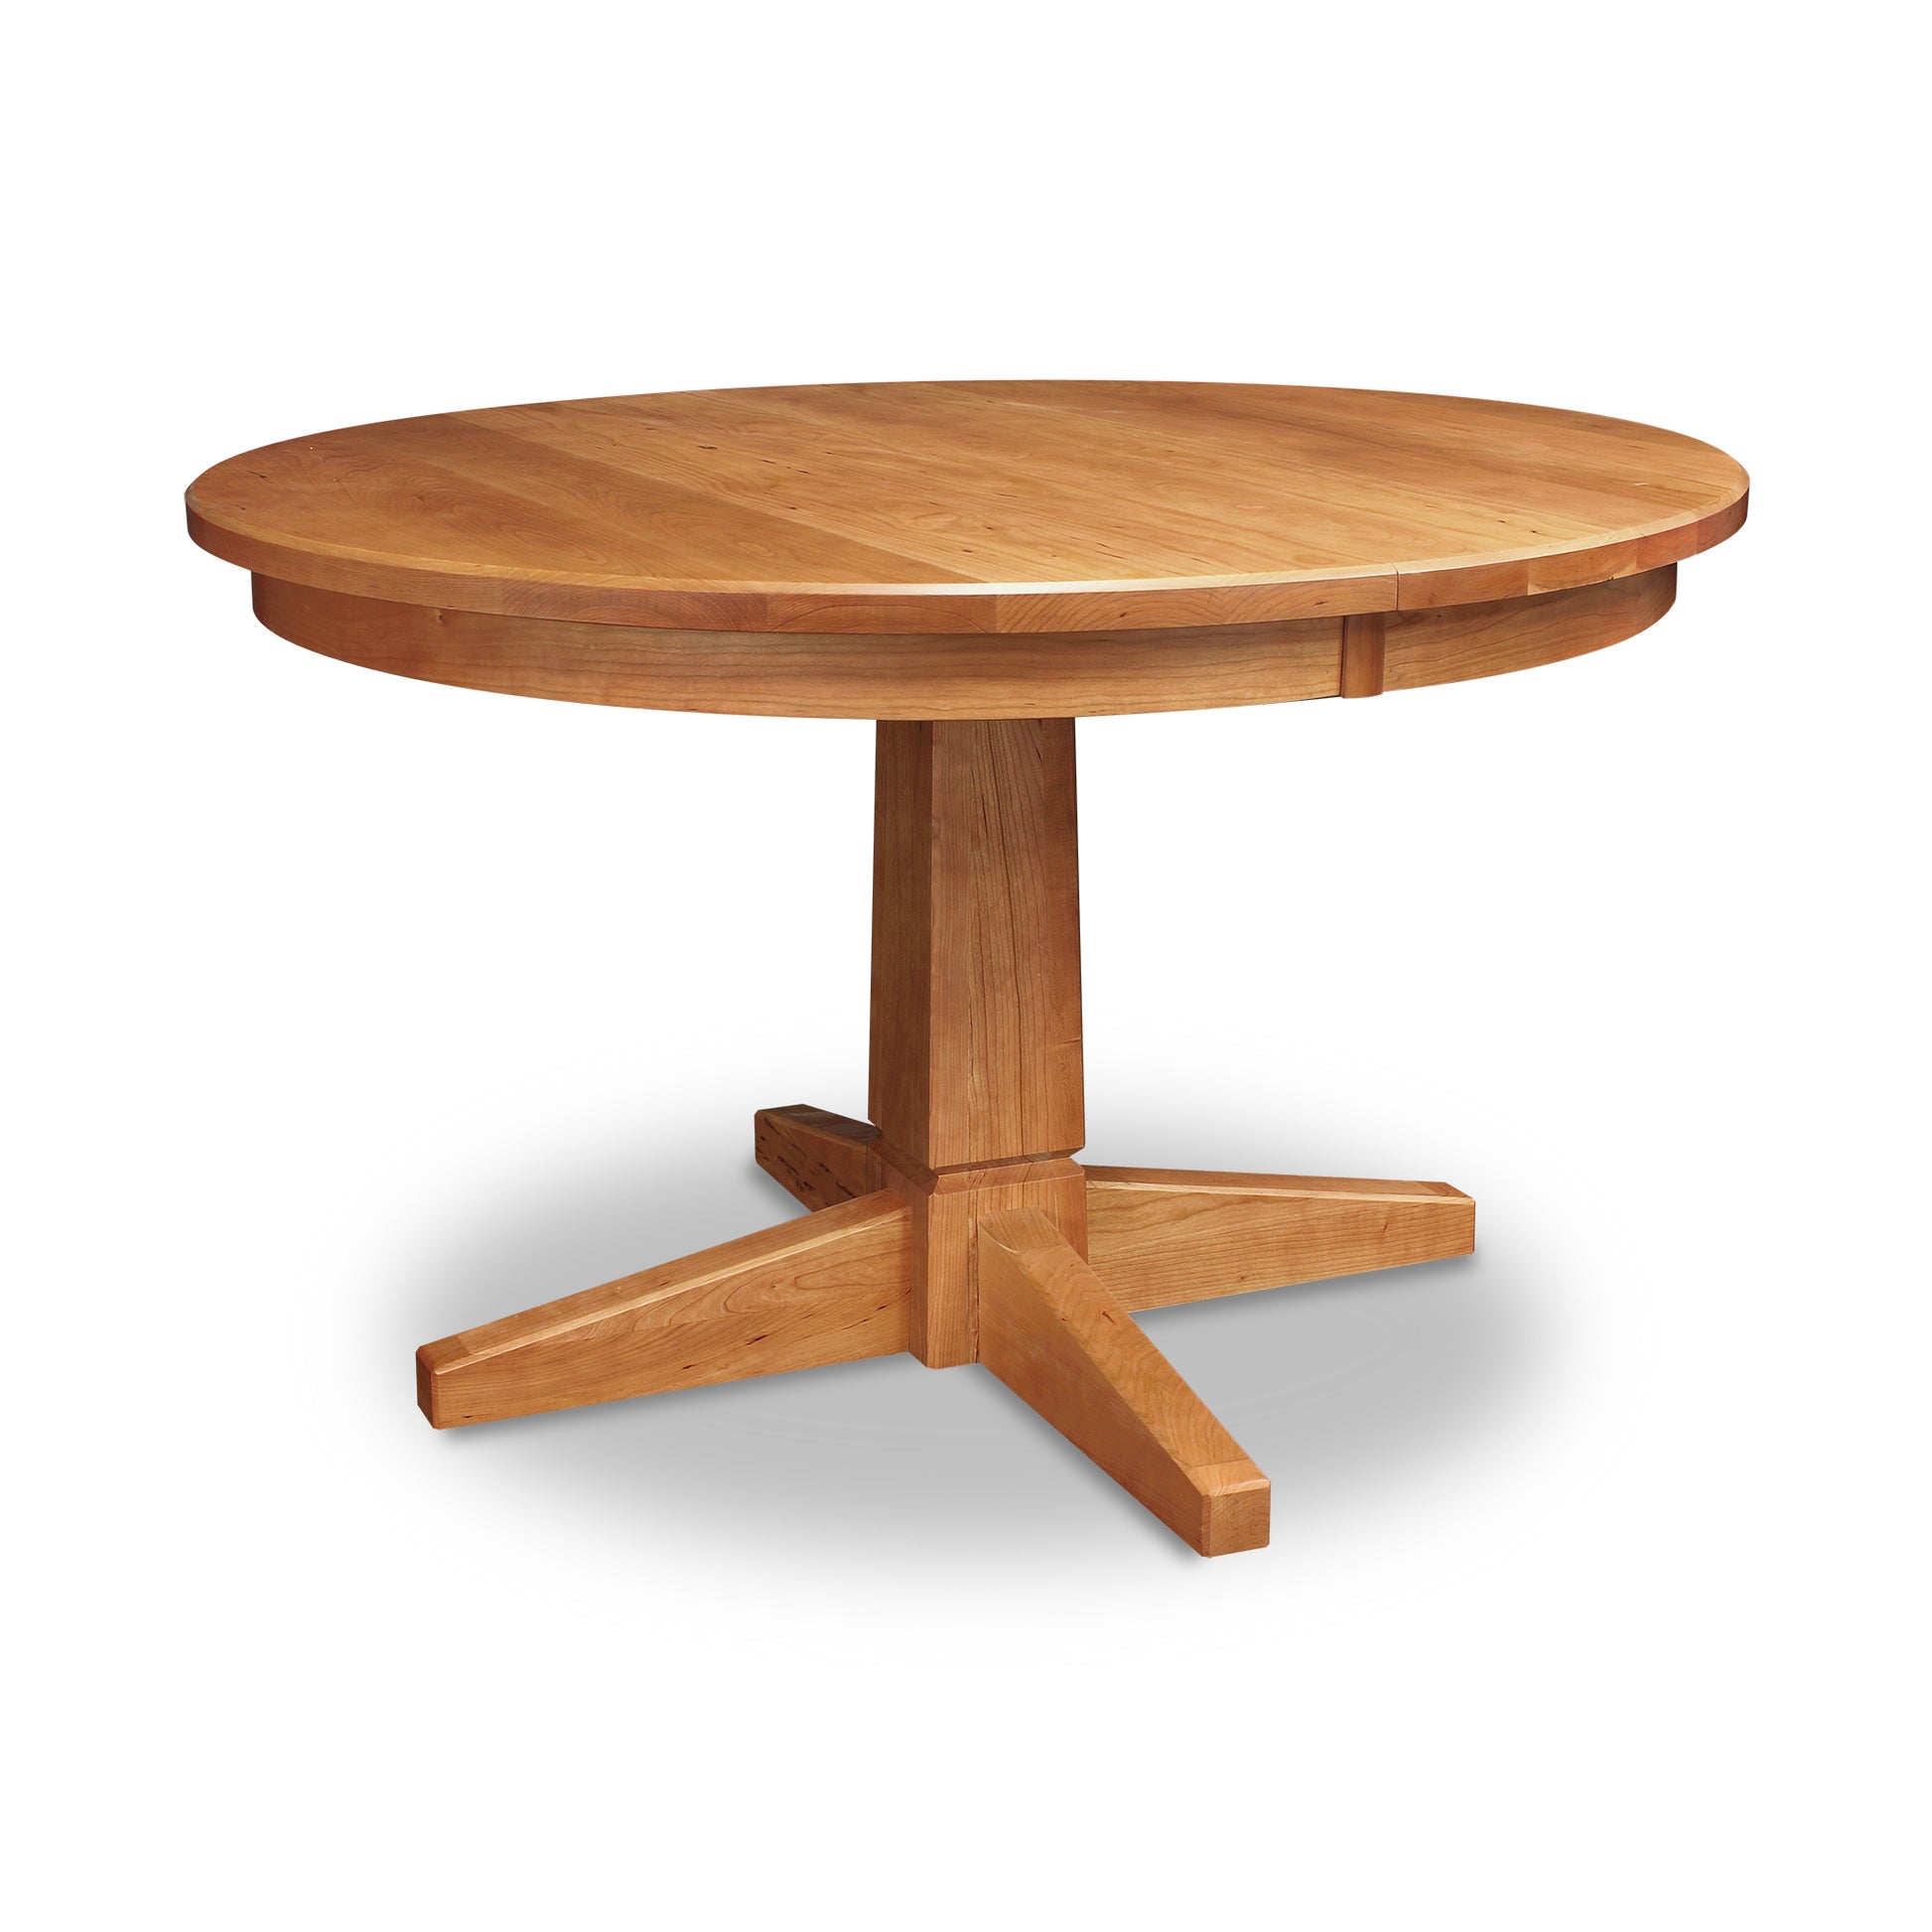 A Lyndon Furniture Natural Vermont Single Pedestal Round Extension Table with four legs on a white background.